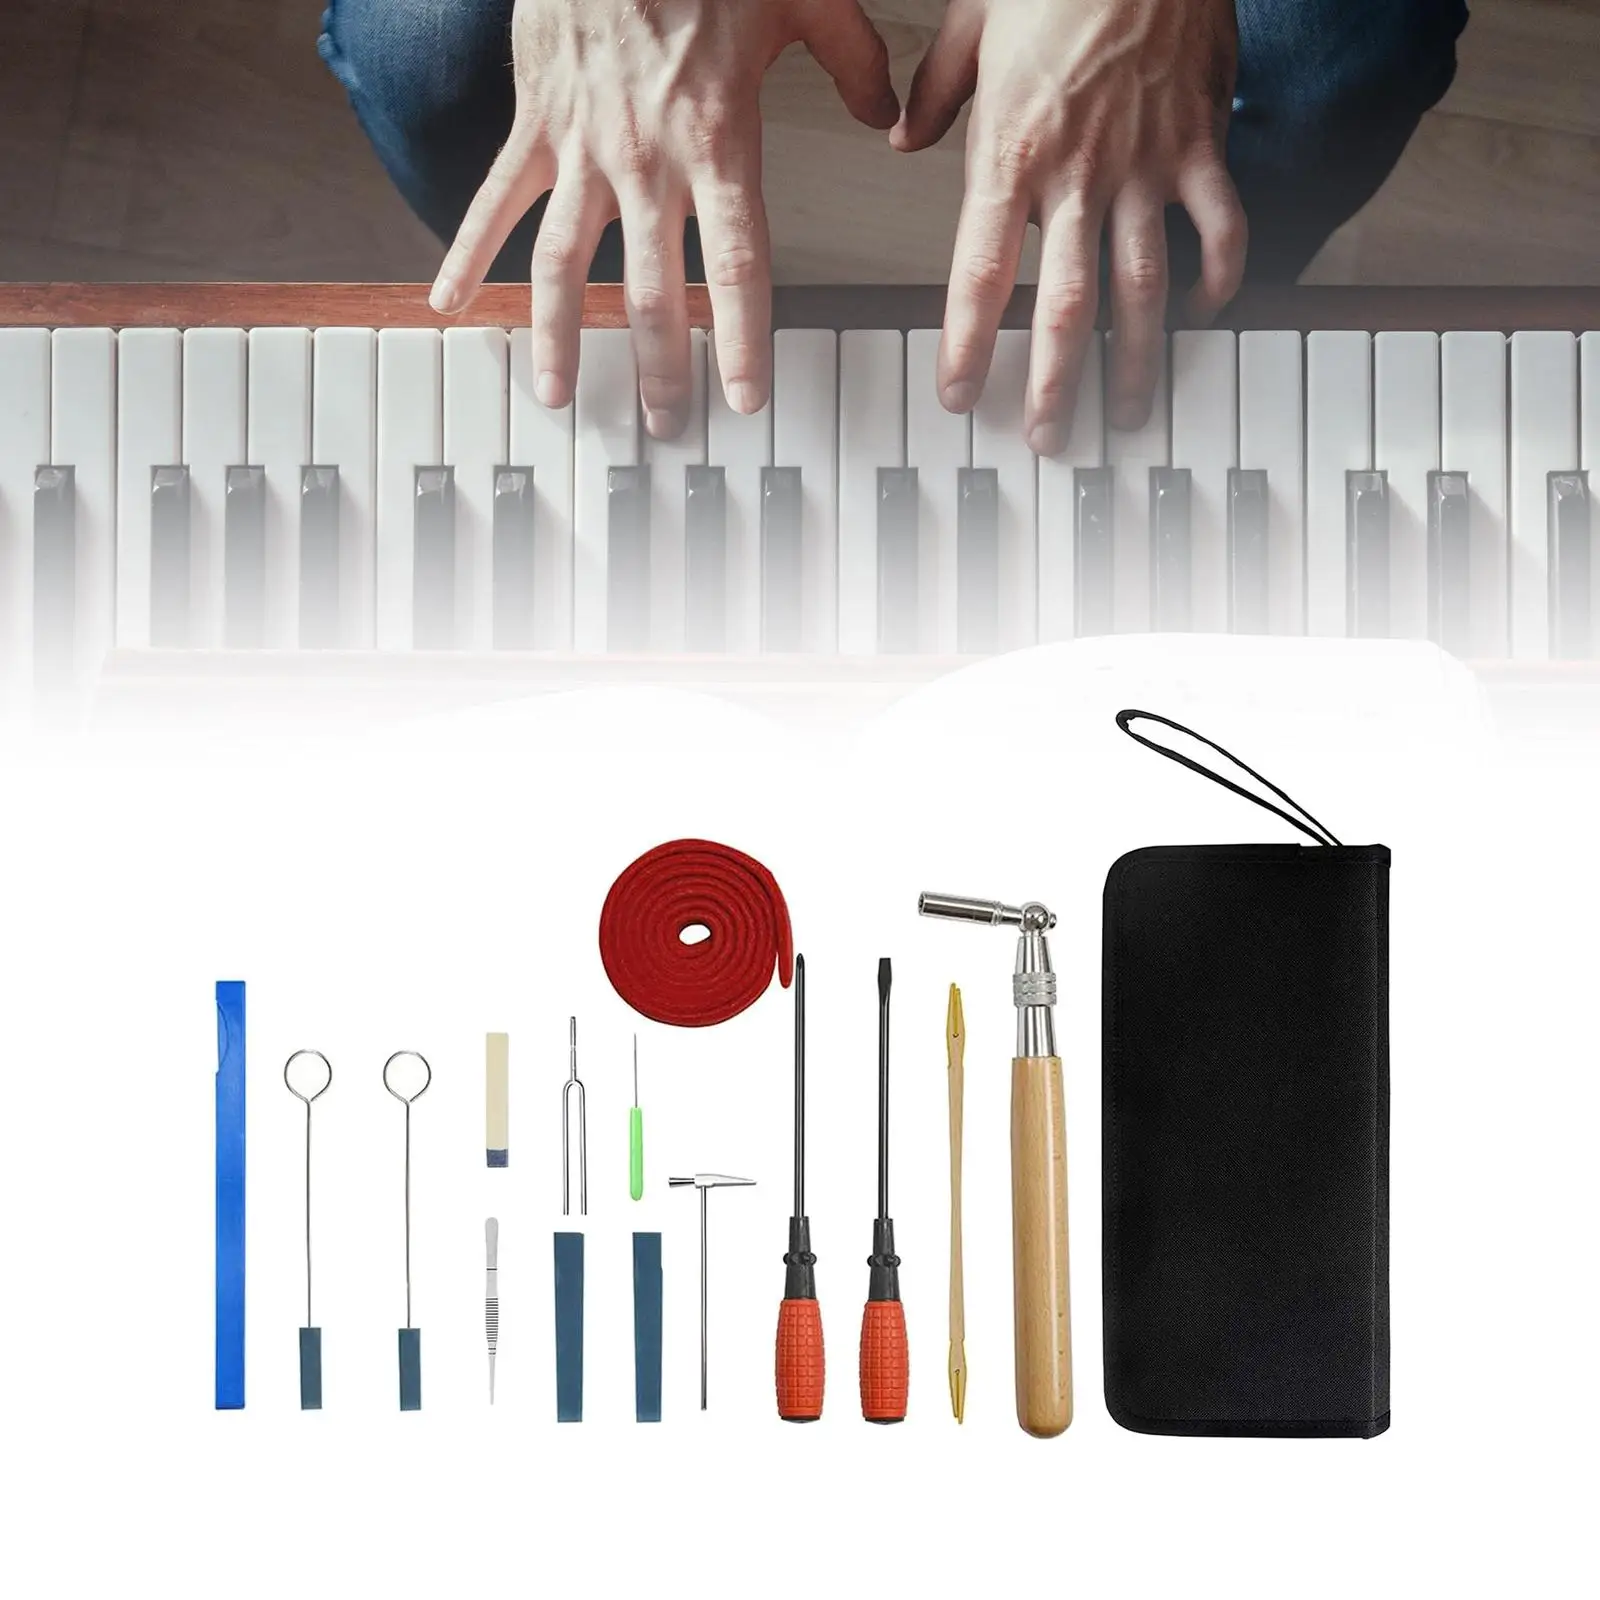 16Pcs Piano Tuning Kits with Case Practical Maintenance Set Tuning Wrench for Piano Tuning Enthusiasts Music Tuning Accessories